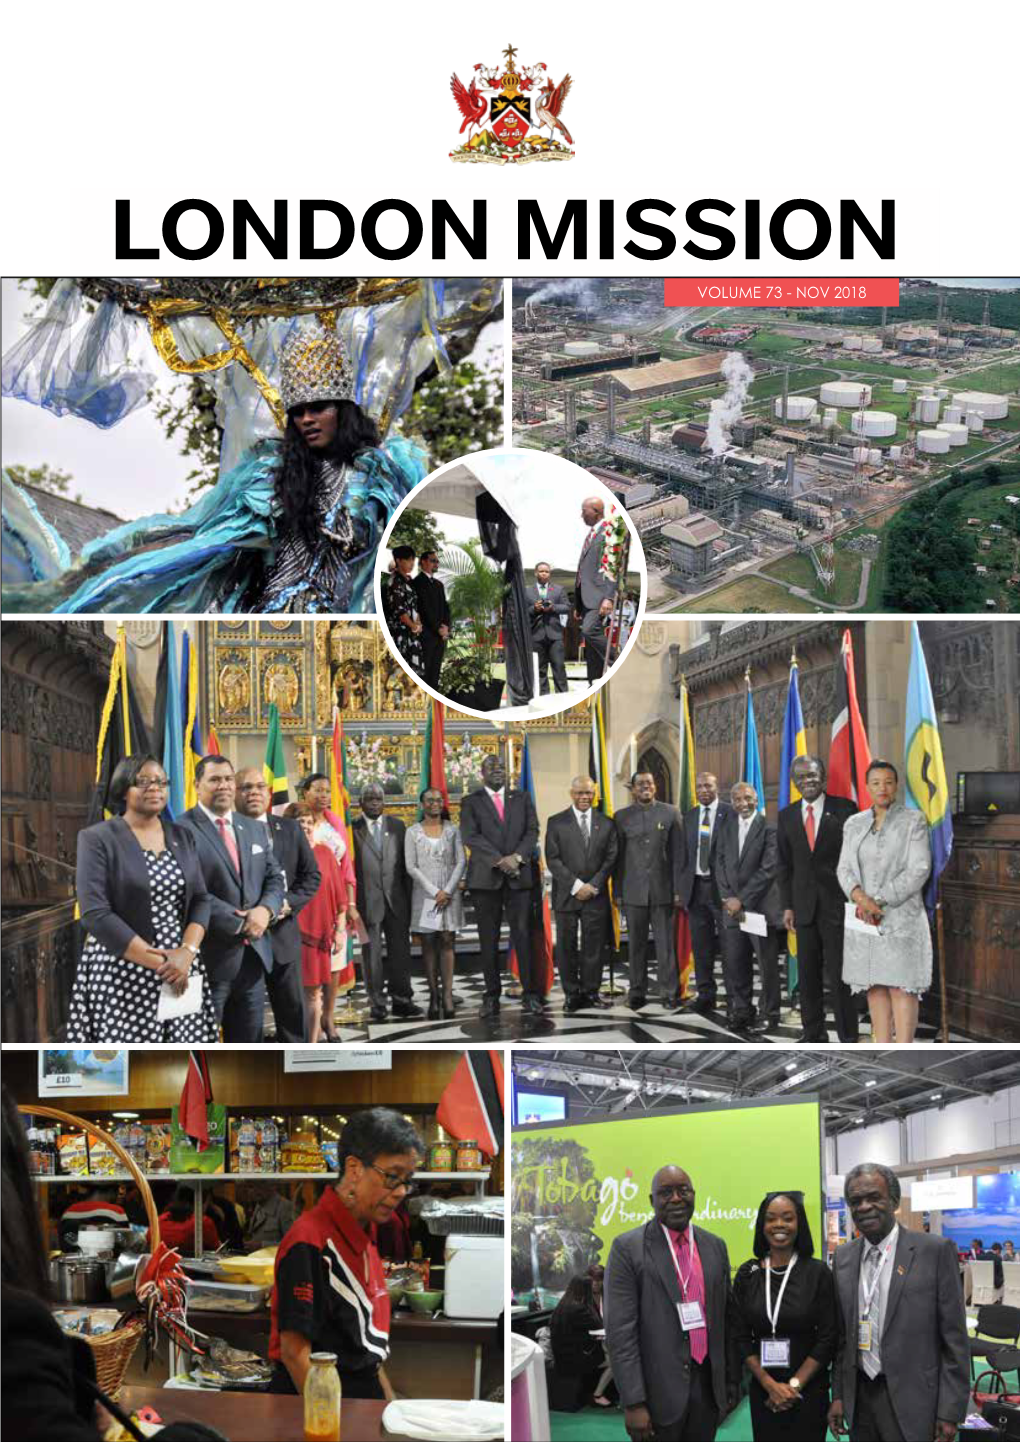 London Mission Volume 73 - Nov 2018 Welcome Message from His Excellency Orville London